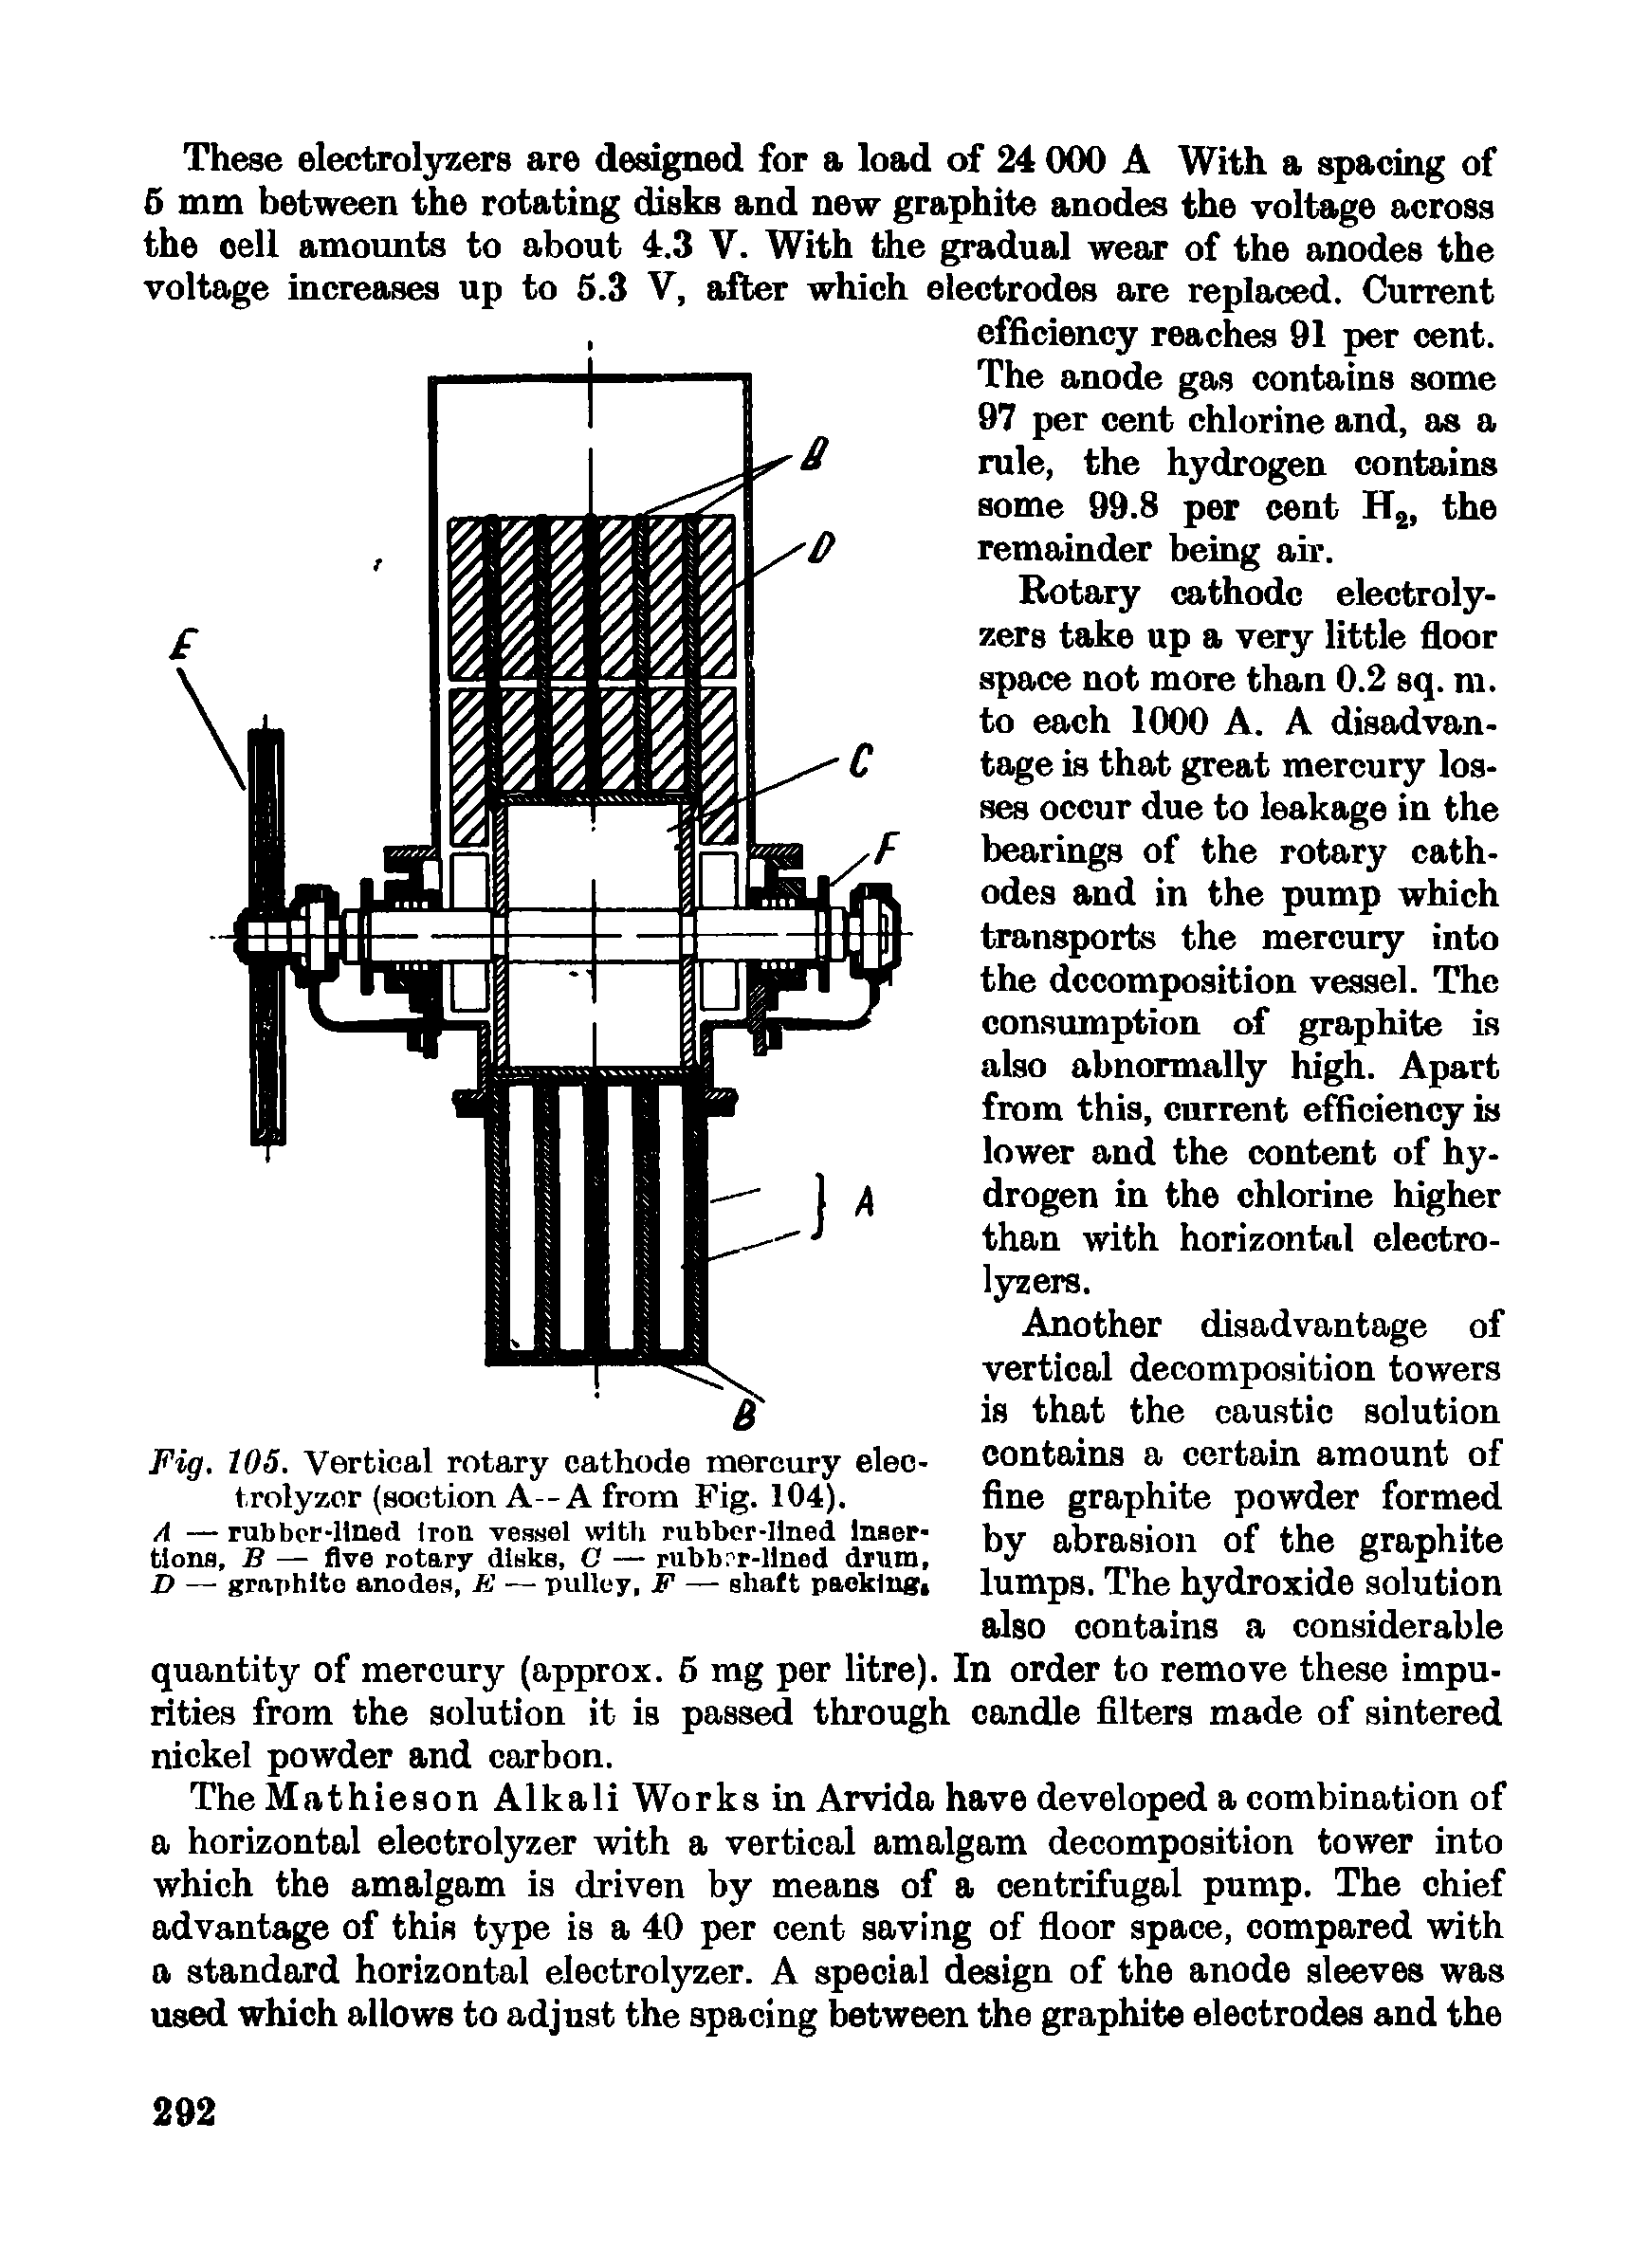 Fig. 105. Vertical rotary cathode mercury electrolyzer (soction A -A from Fig. 104).